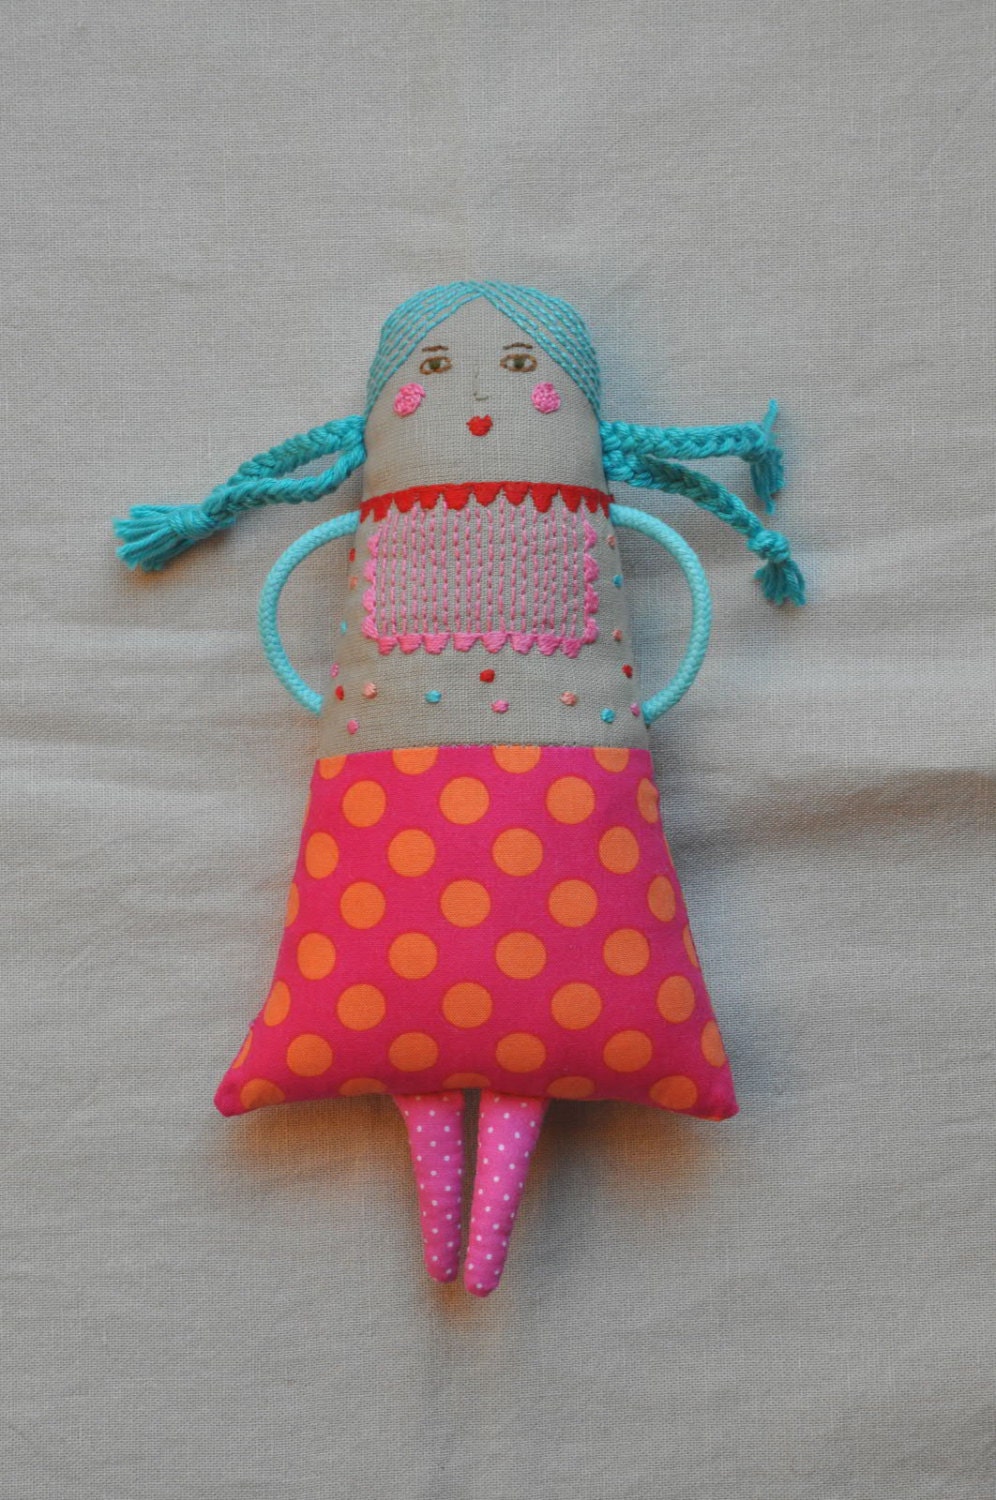 Handmade doll with embroidered face and body